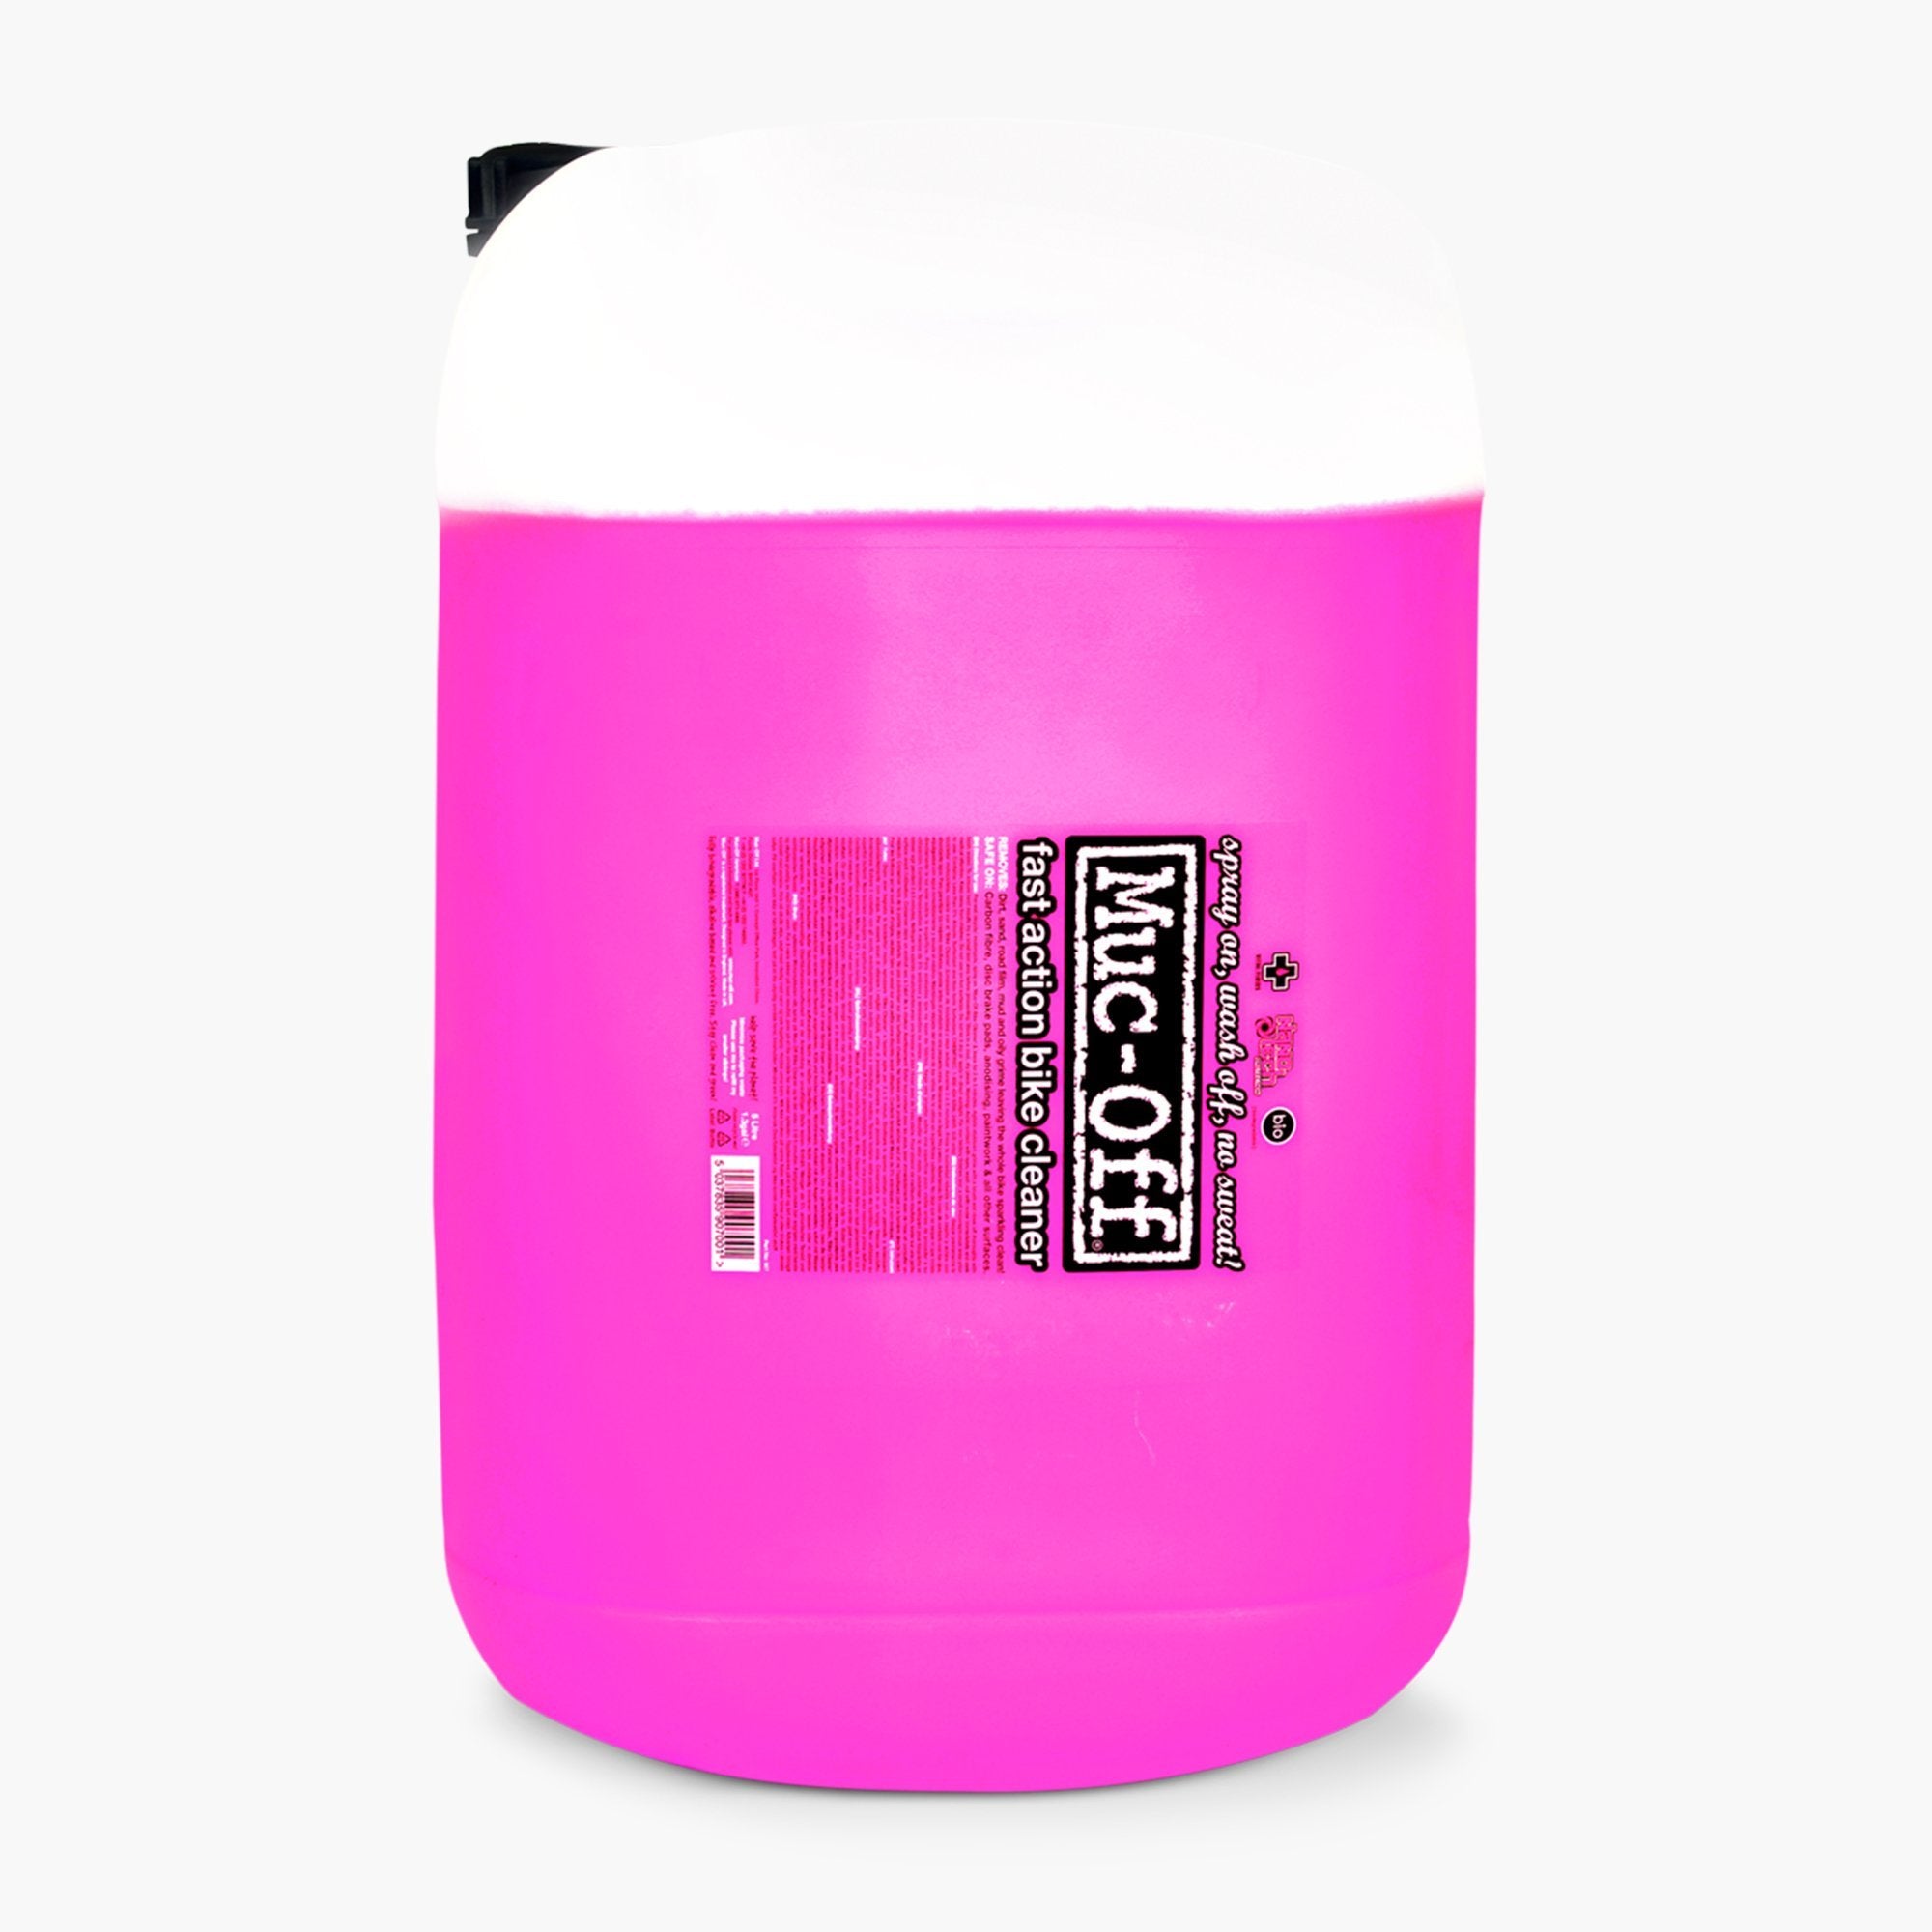 Muc-Off - Nano Tech Motorcycle Cleaner (1L)